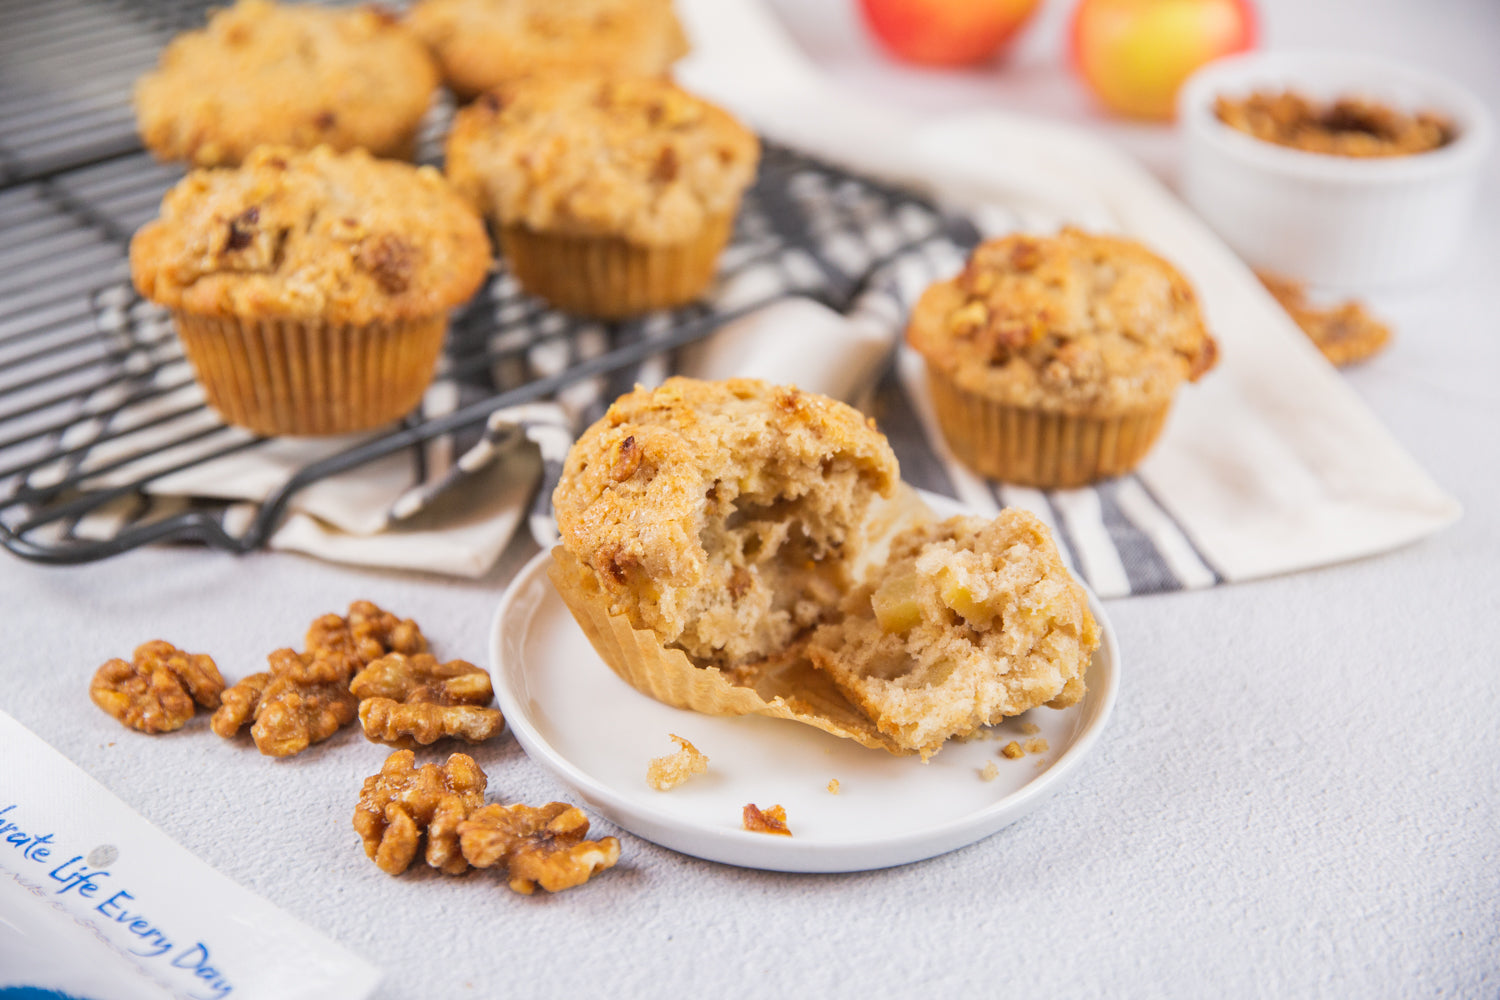 Santé Nuts - Recipe - Apple Cinnamon Muffins with Candied Walnuts